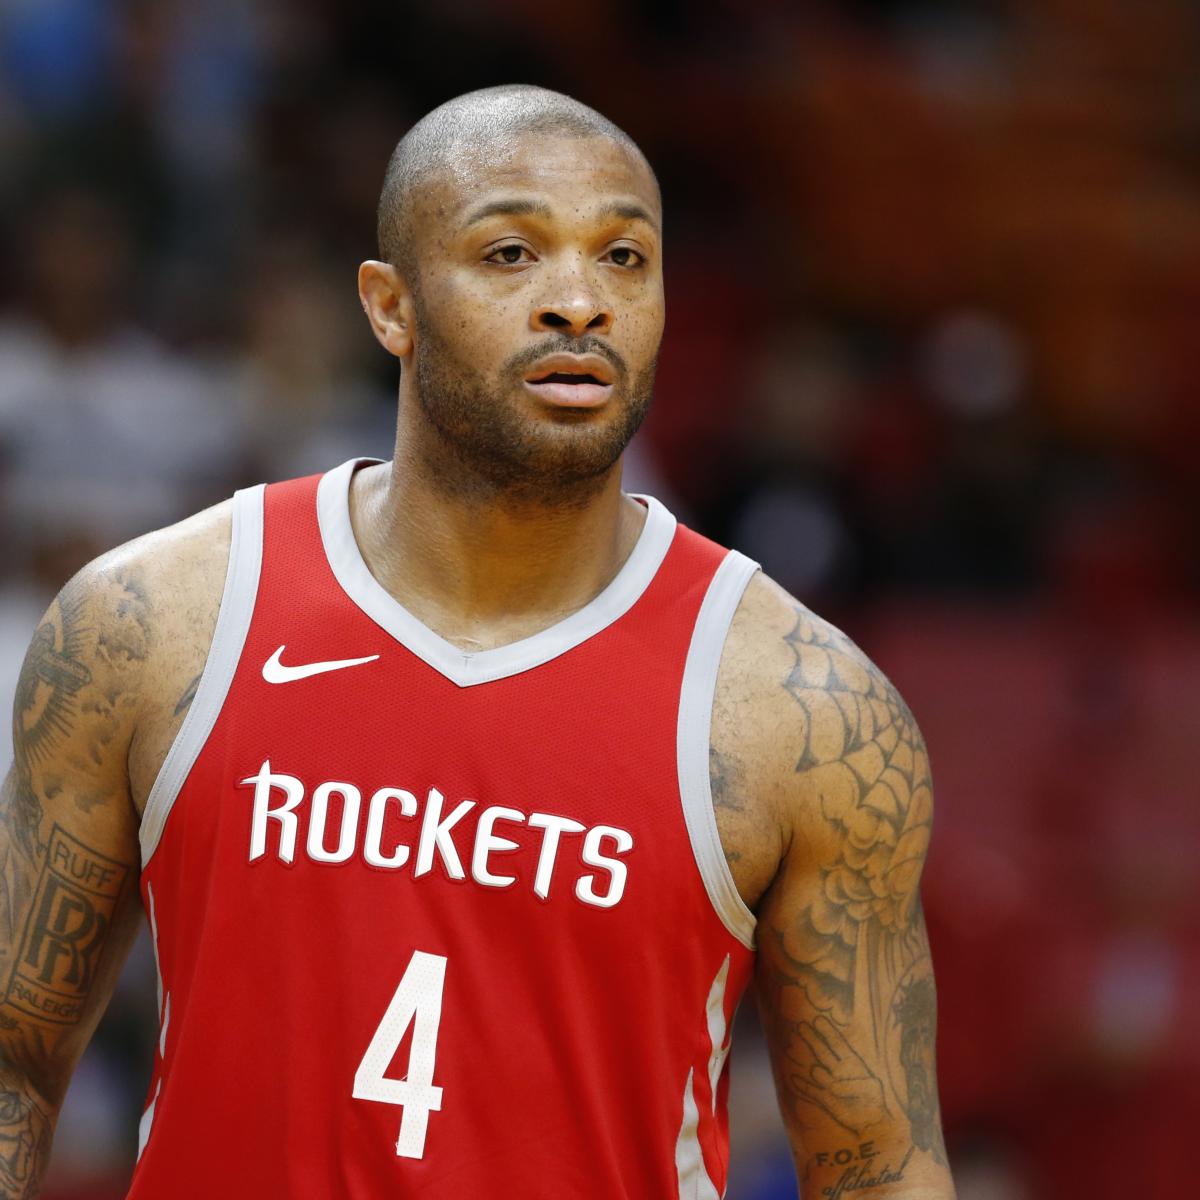 Creech: Rockets' P.J. Tucker shows grit in Game 3